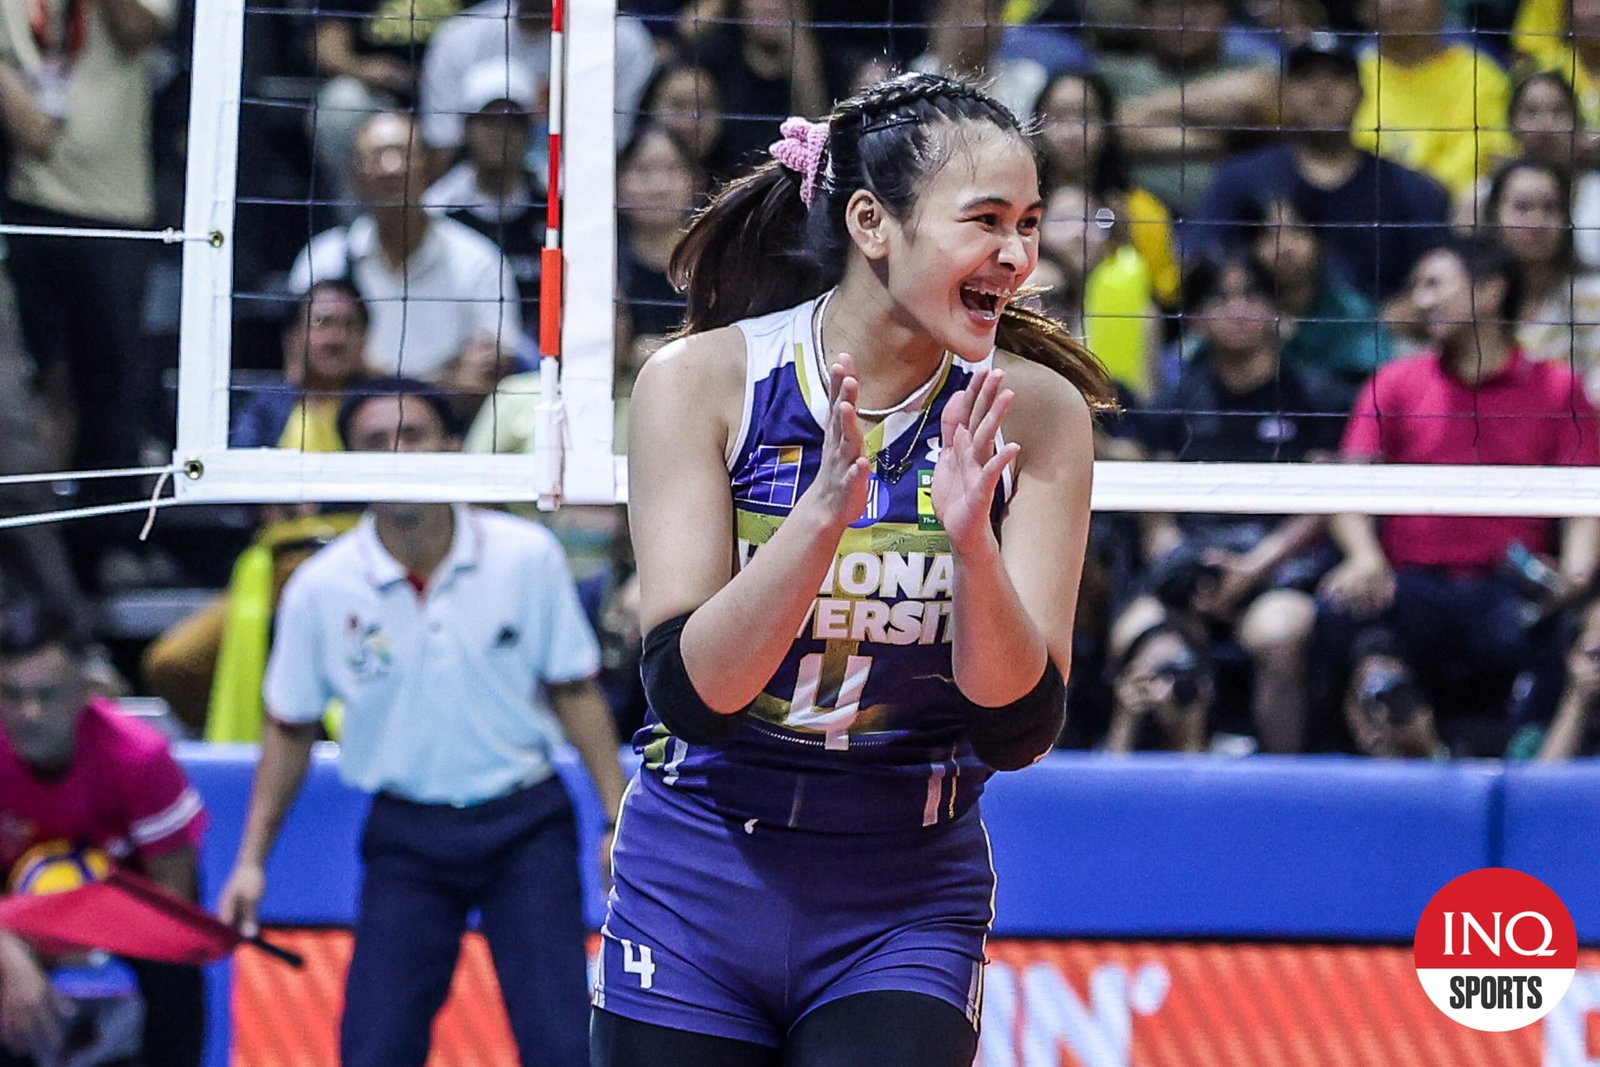 Bella Belen back for UAAP title repeat bid with NU Lady Bulldogs